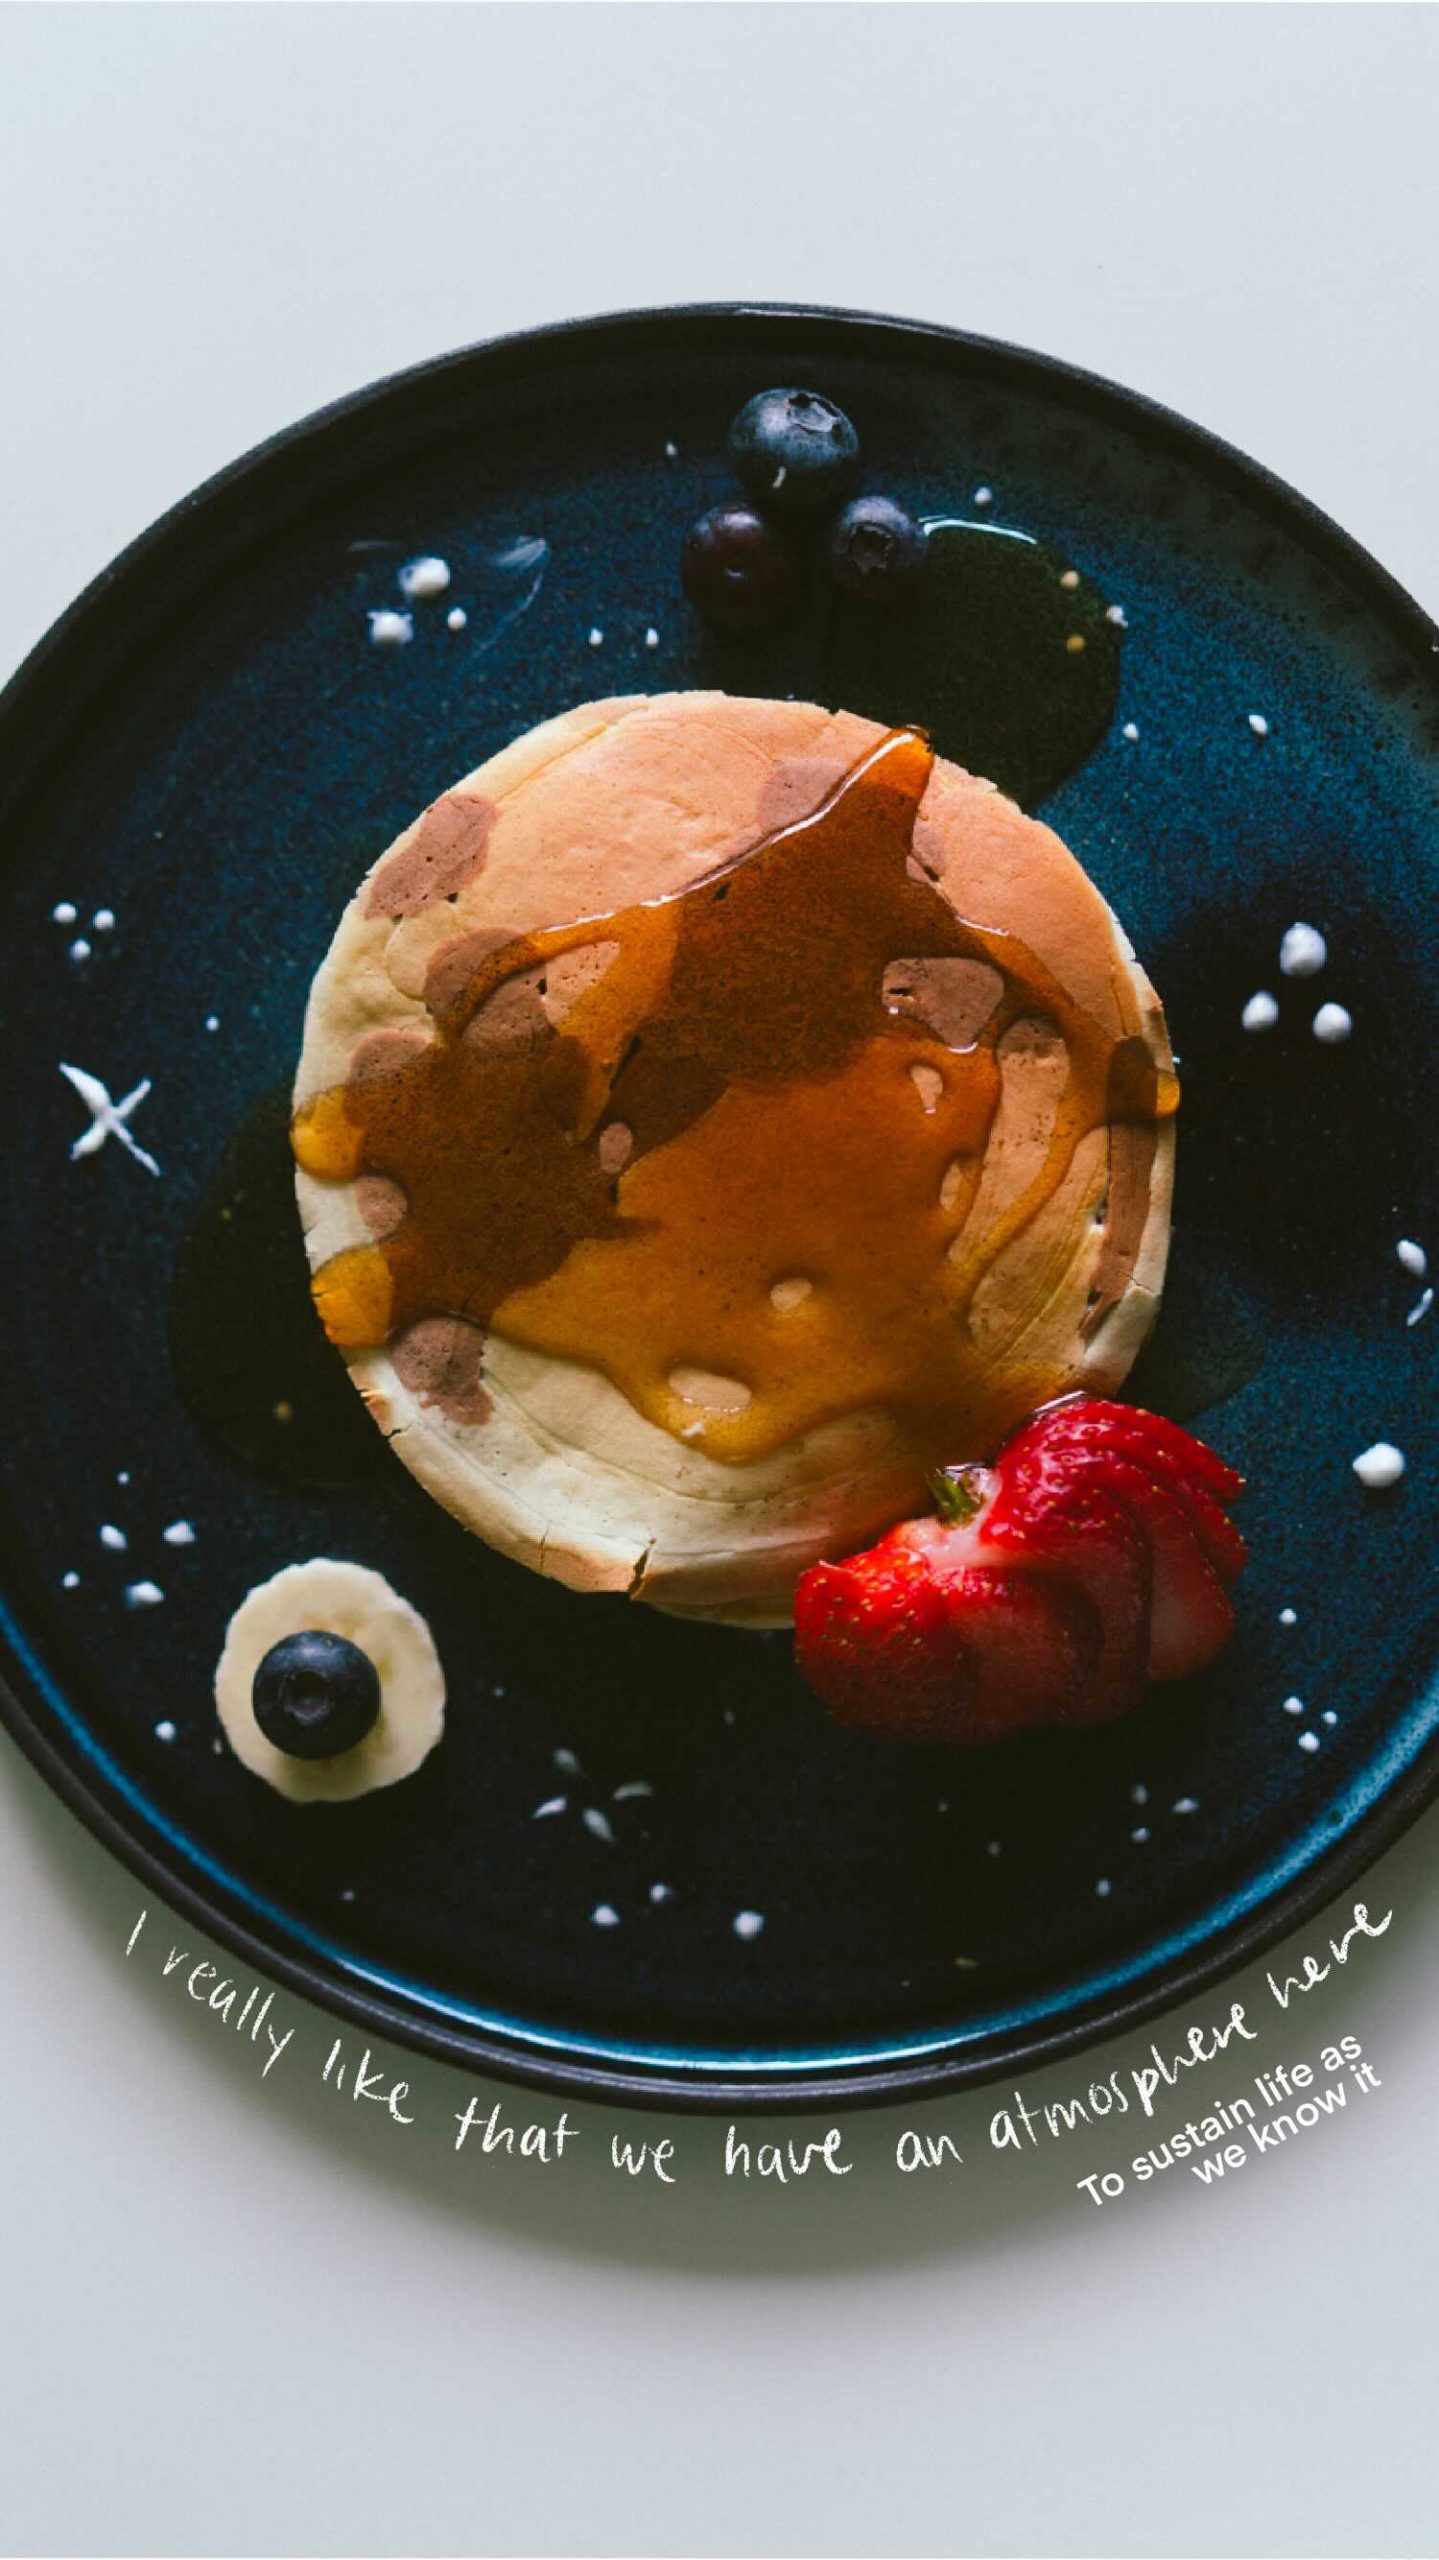 Pancakes (representing earth) on plate with strawberries quote - I really like that we have an atmosphere here